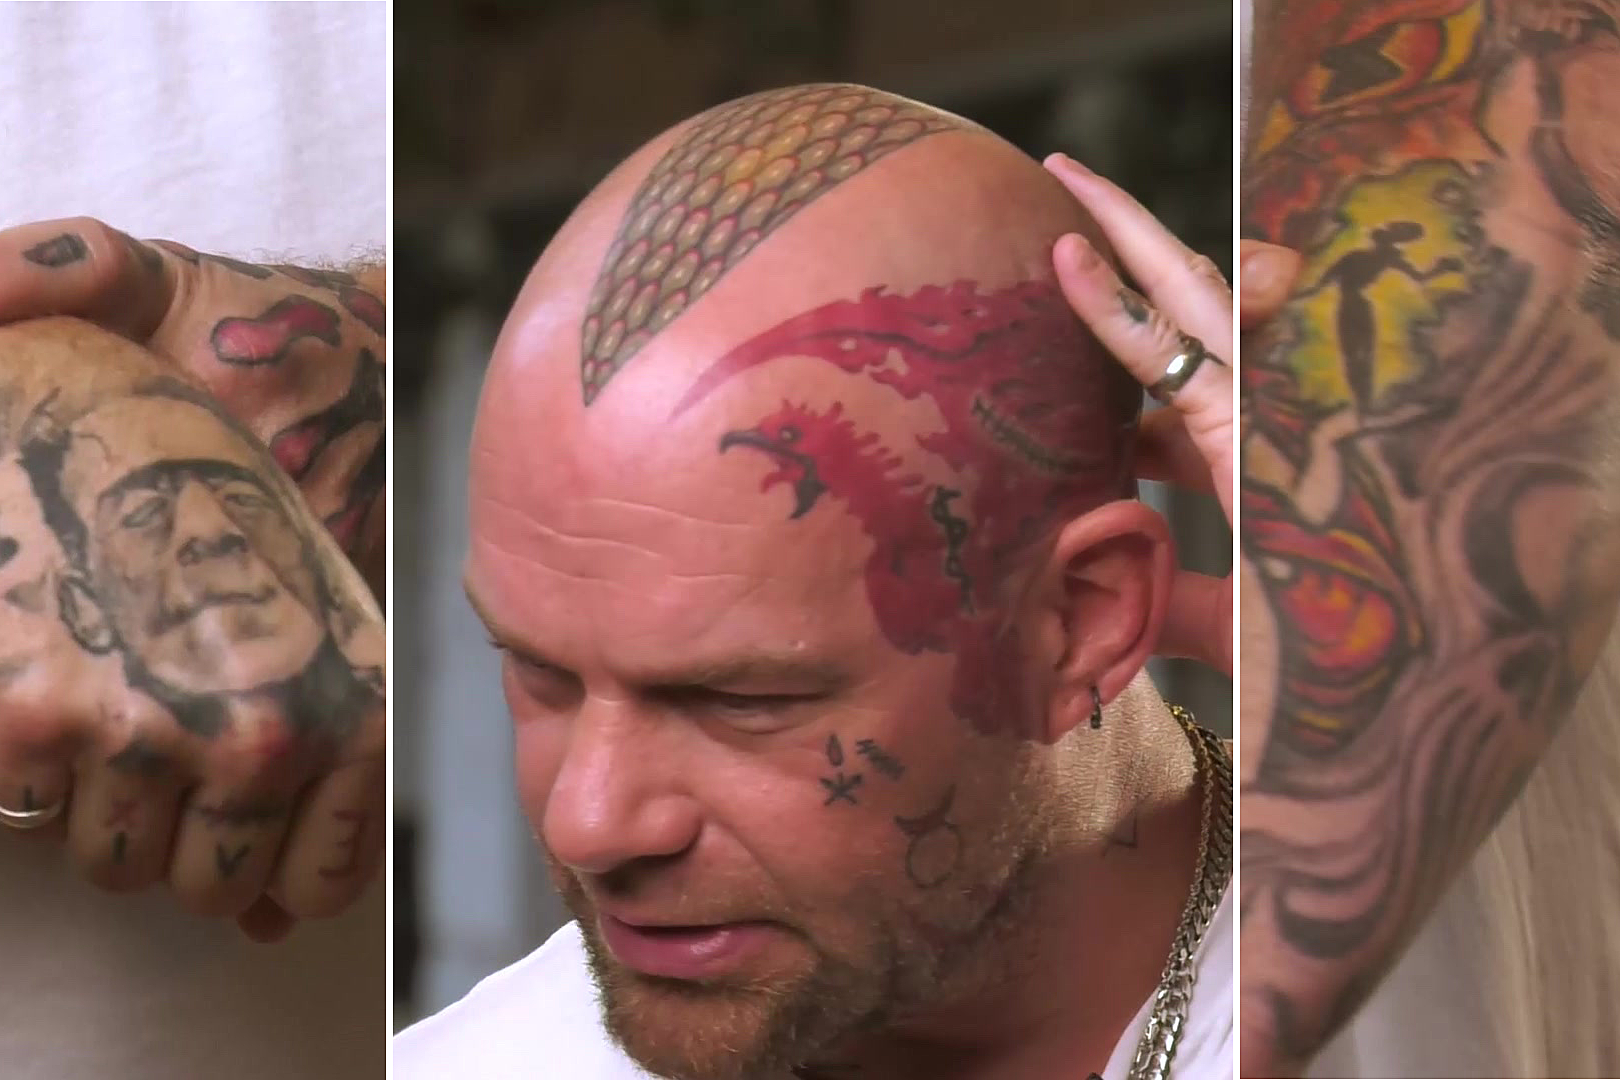 COREY TAYLOR Wont Be Joining Face Tattoo Club Says They Make You Look  Like A Shitty Notebook from High School